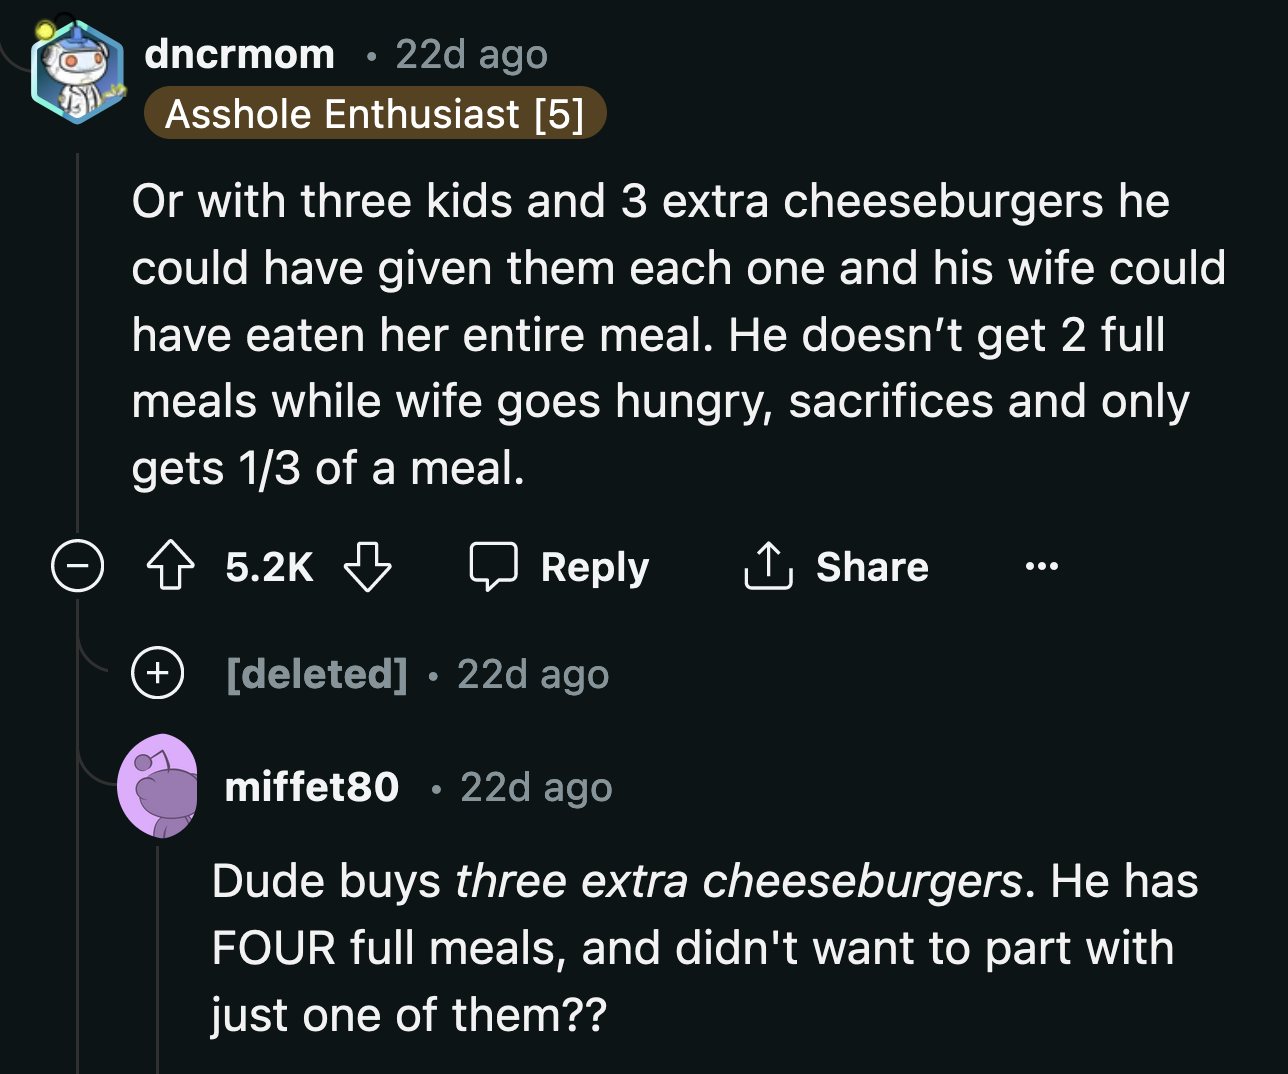 Couldn't he see how hypocritical it was of him to get upset when OP ate one of his burgers while she wasn't allowed to be annoyed that he gave away a third of her meal?